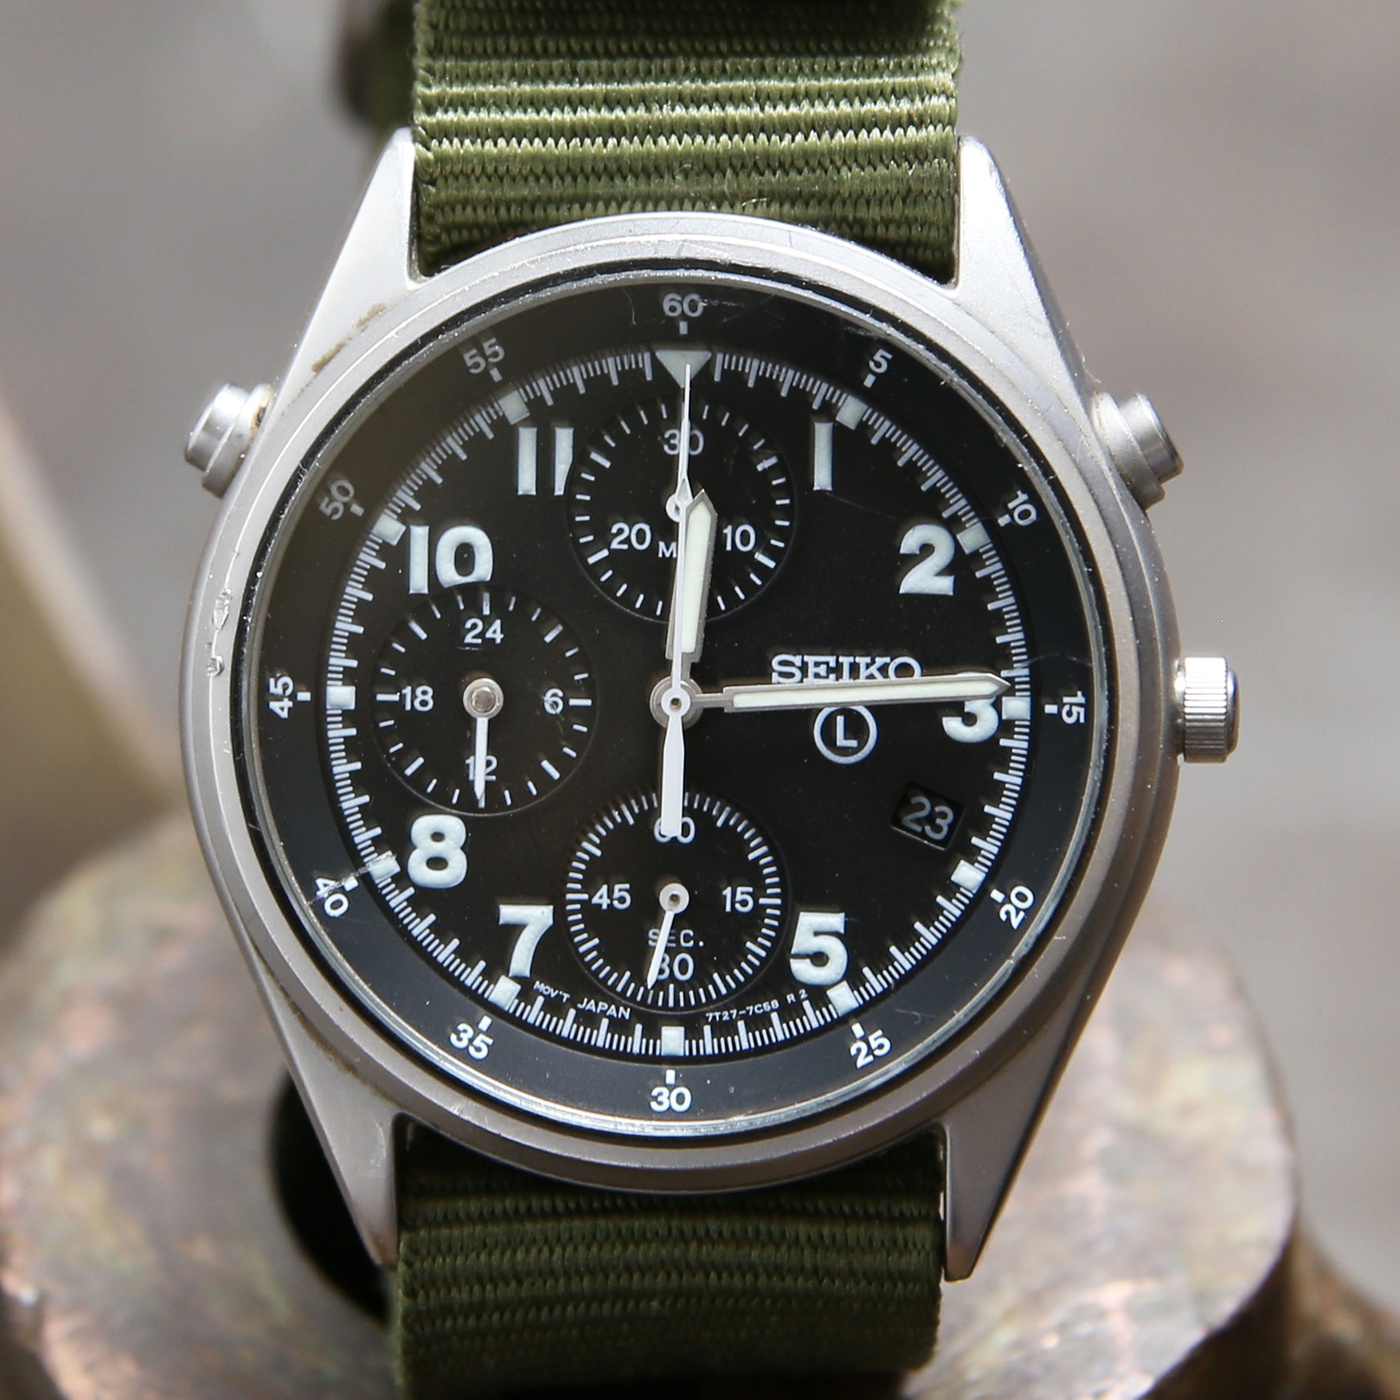 SEIKO RARE SWEDISH HELICOPTERS PILOT WATCH, EARLY 90's 7T27-7A20 A6 ISSUE #M3440-058010  nyc